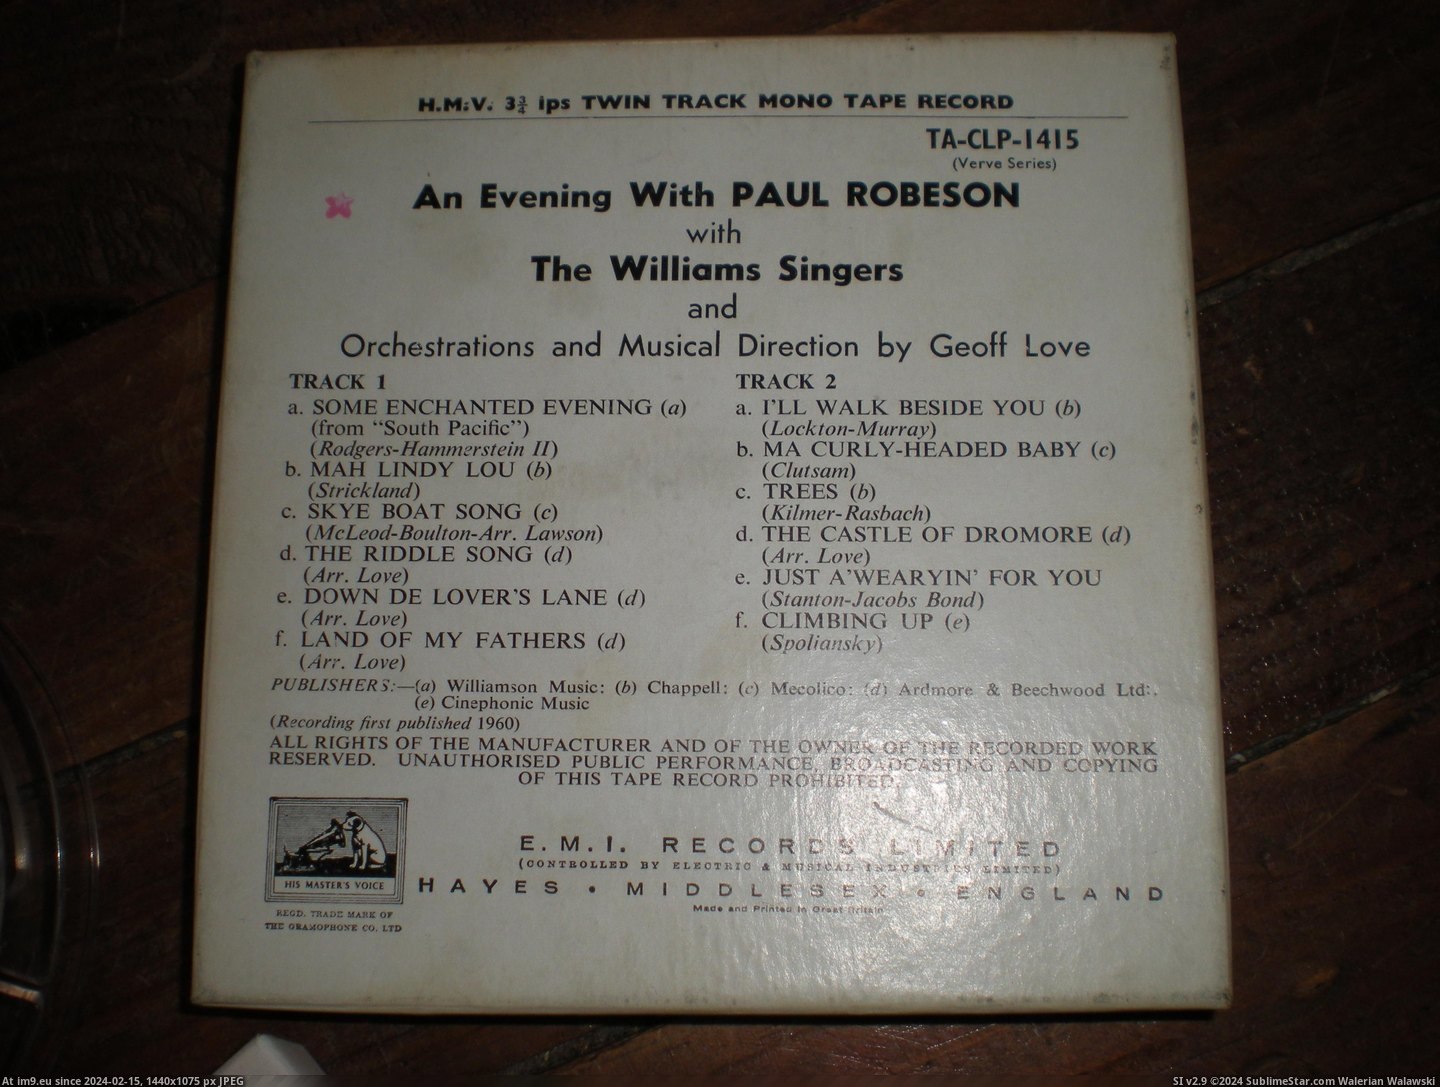  #Robeson  Robeson 5 Pic. (Image of album new 1))